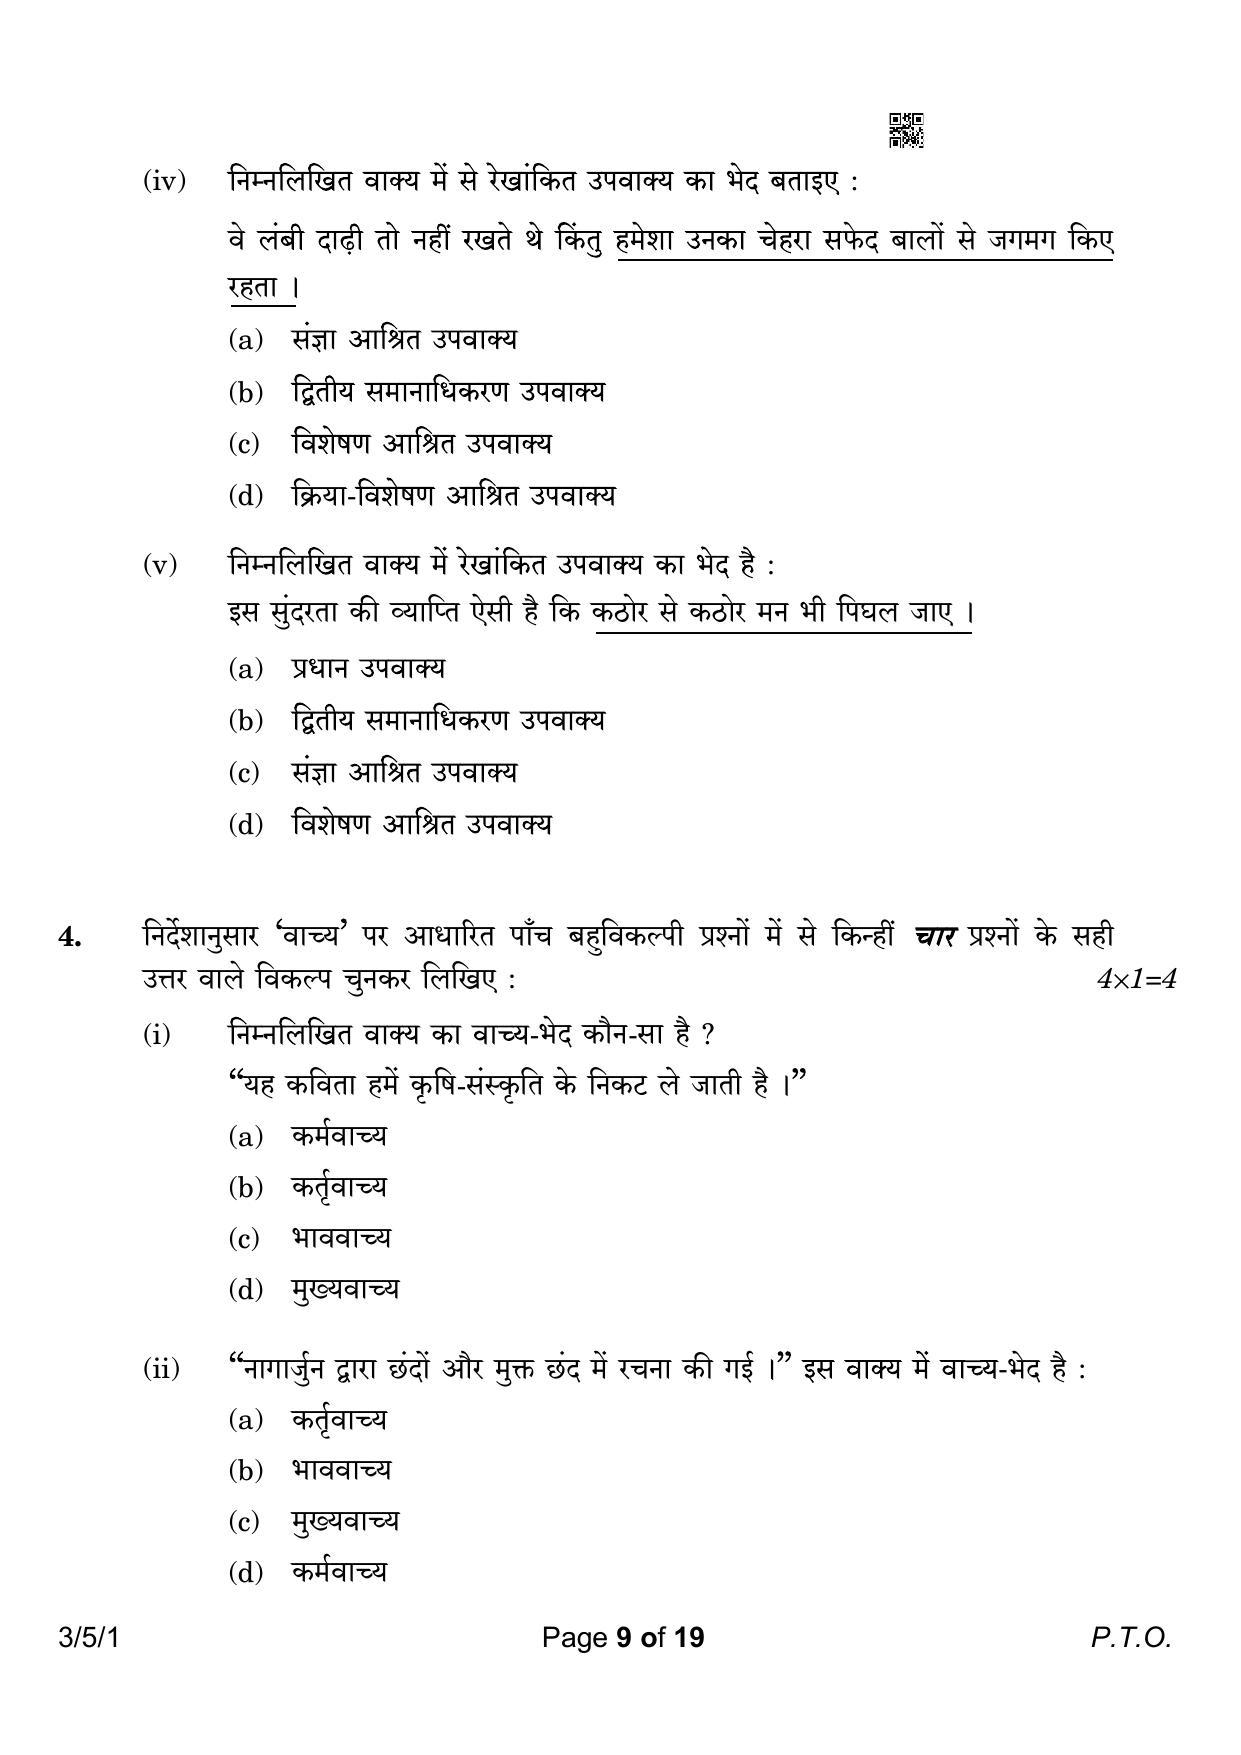 CBSE Class 10 3-5-1 Hindi A 2023 Question Paper - Page 9